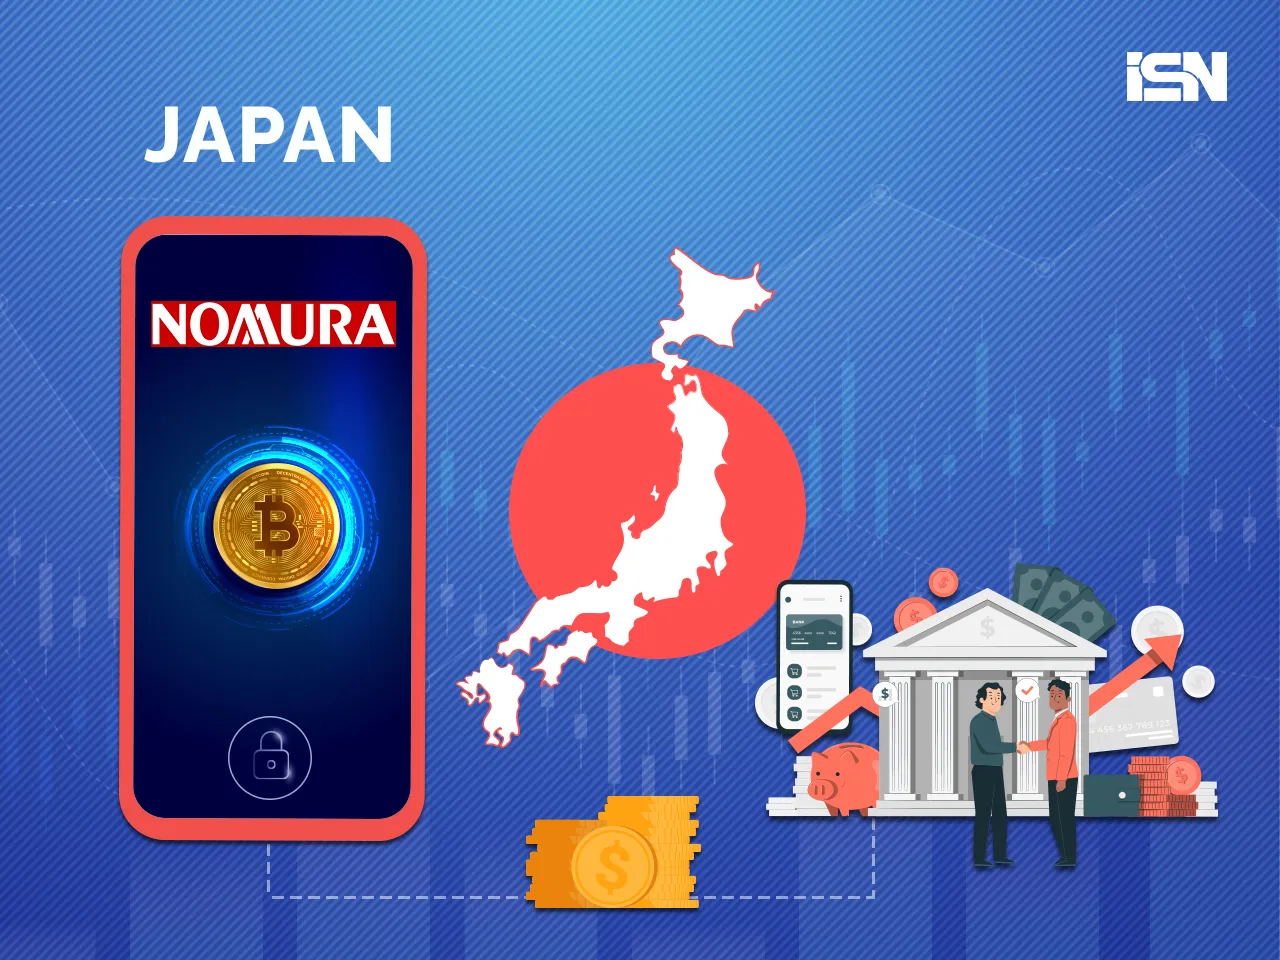 Japan's largest investment bank launches Bitcoin fund for institutional investors